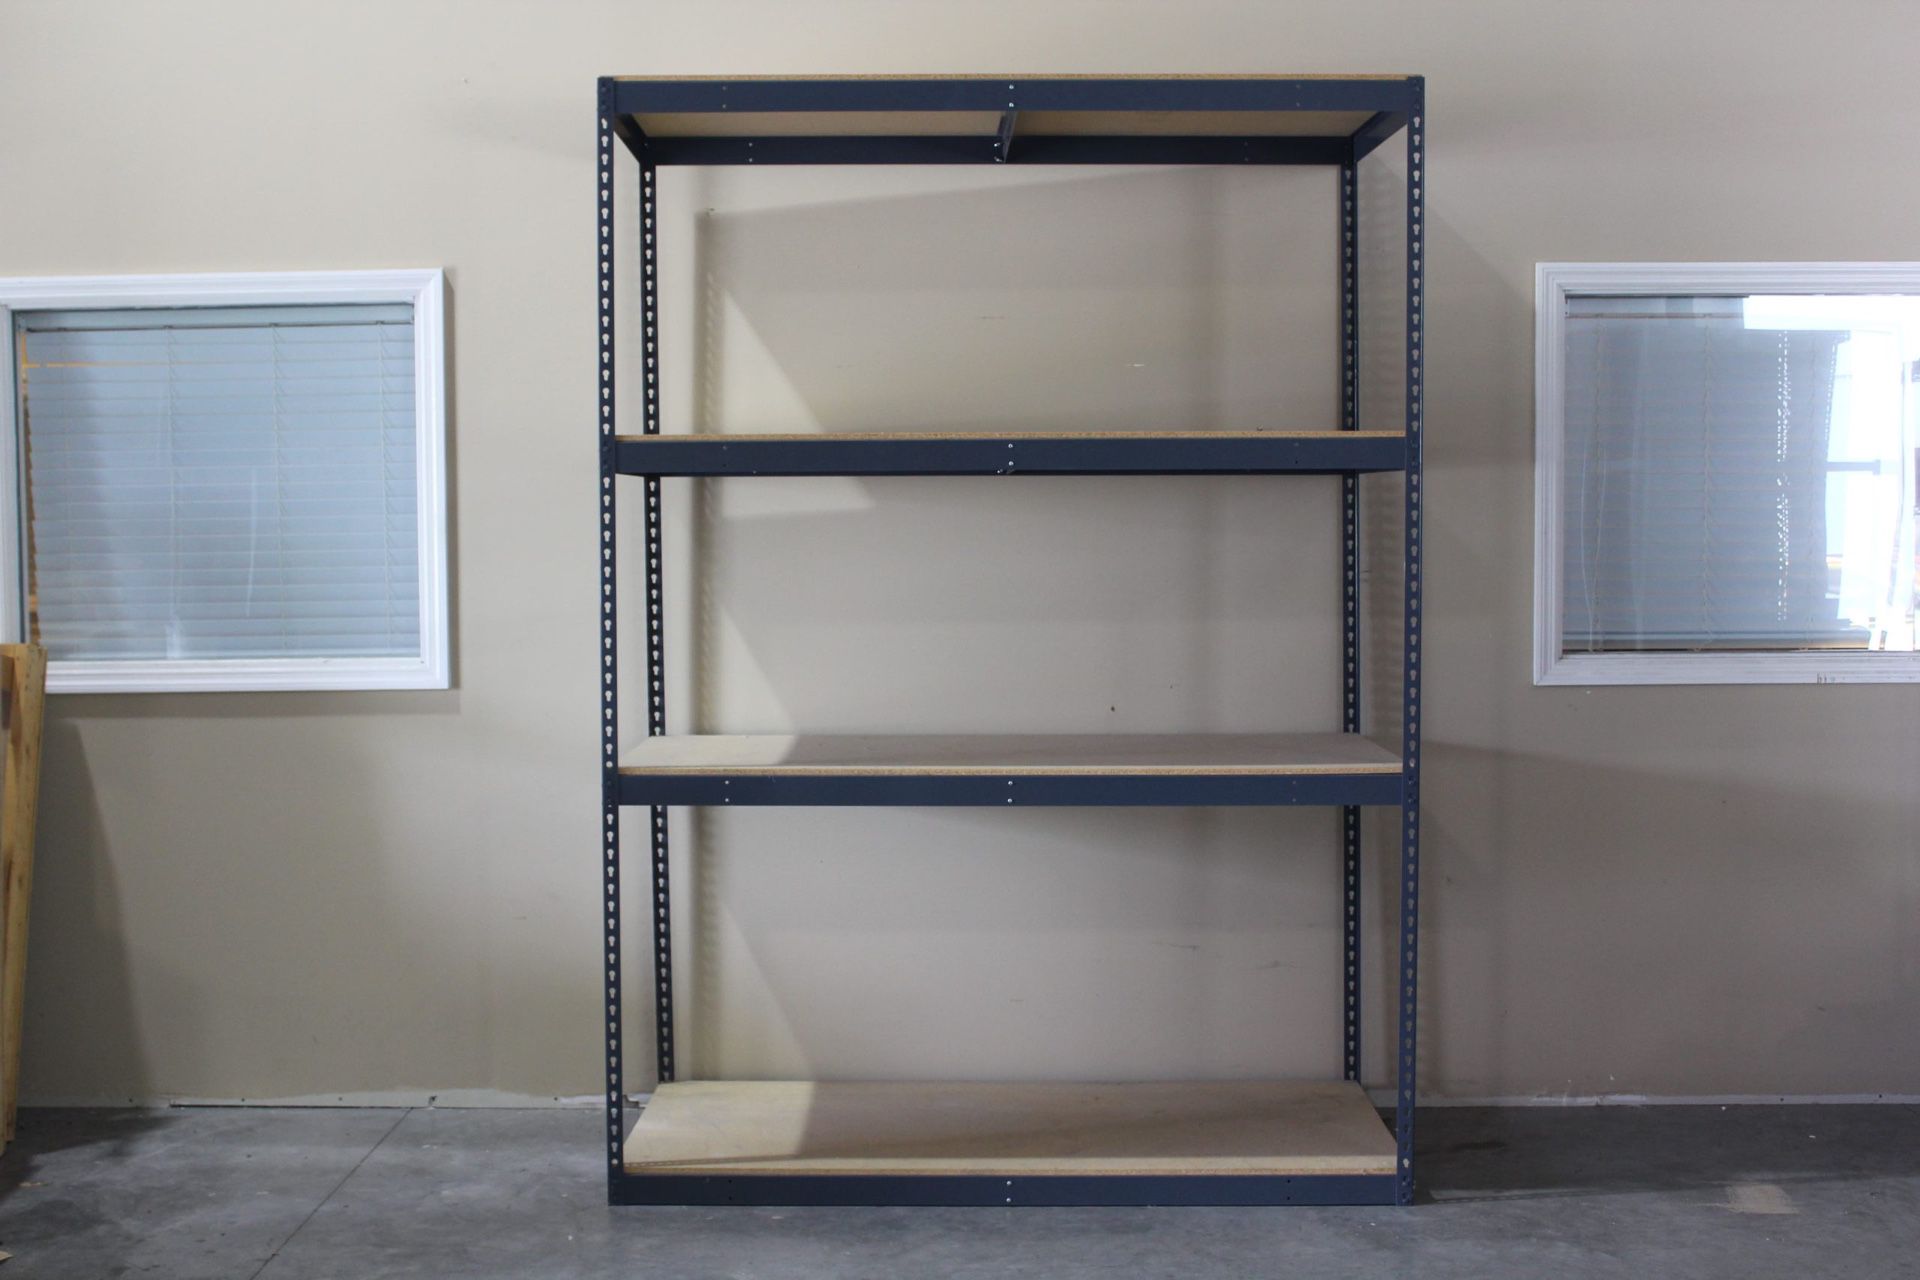 Industrial Shelving 72 in W x 24 in D Boltless Warehouse Racks Storage She’d Shelves Stronger Than Homedepot And Lowes Racks Delivery Available